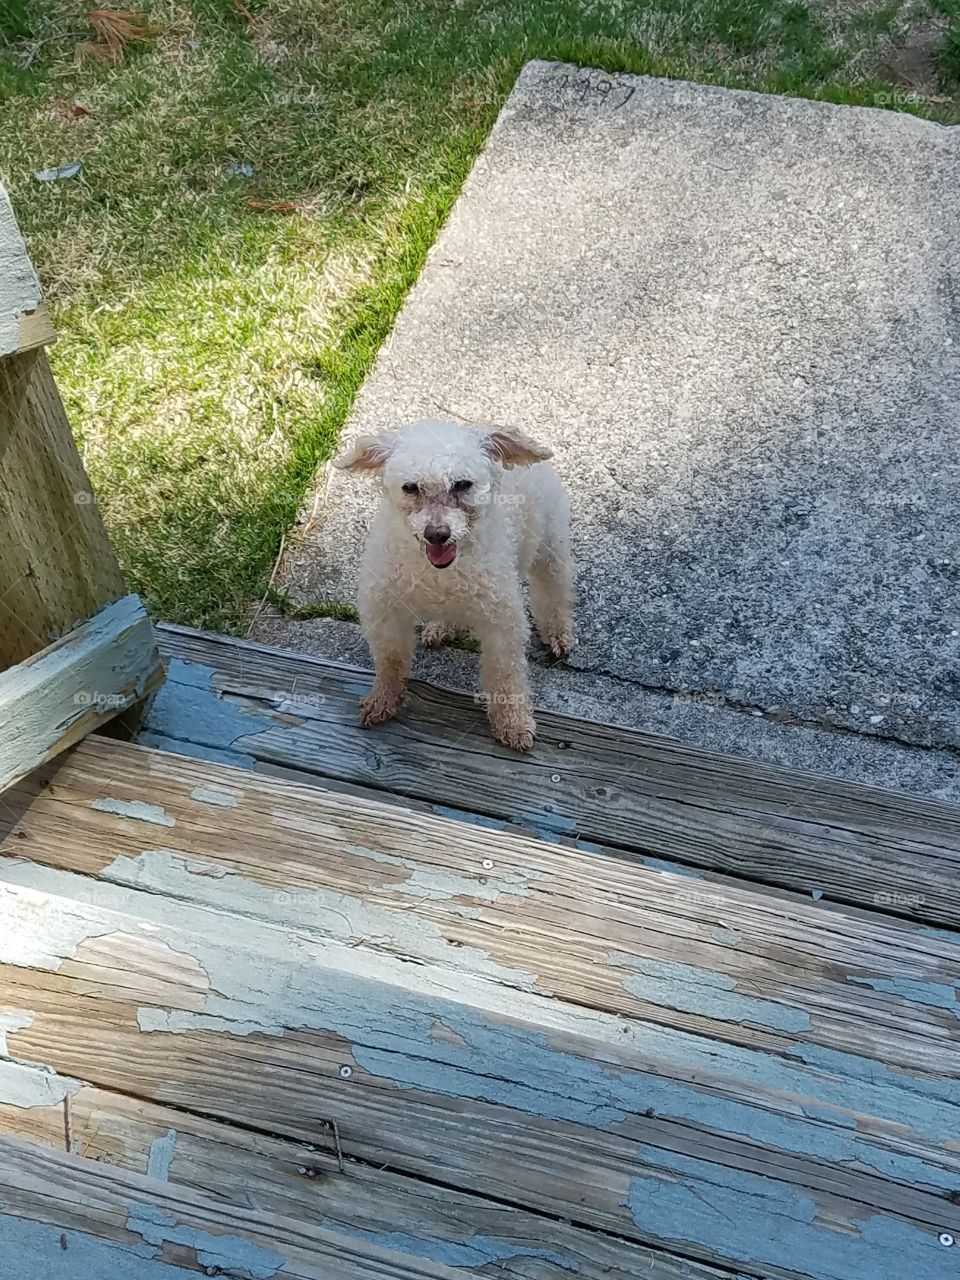 My poodle needs help coming up the steps now. He's getting older.